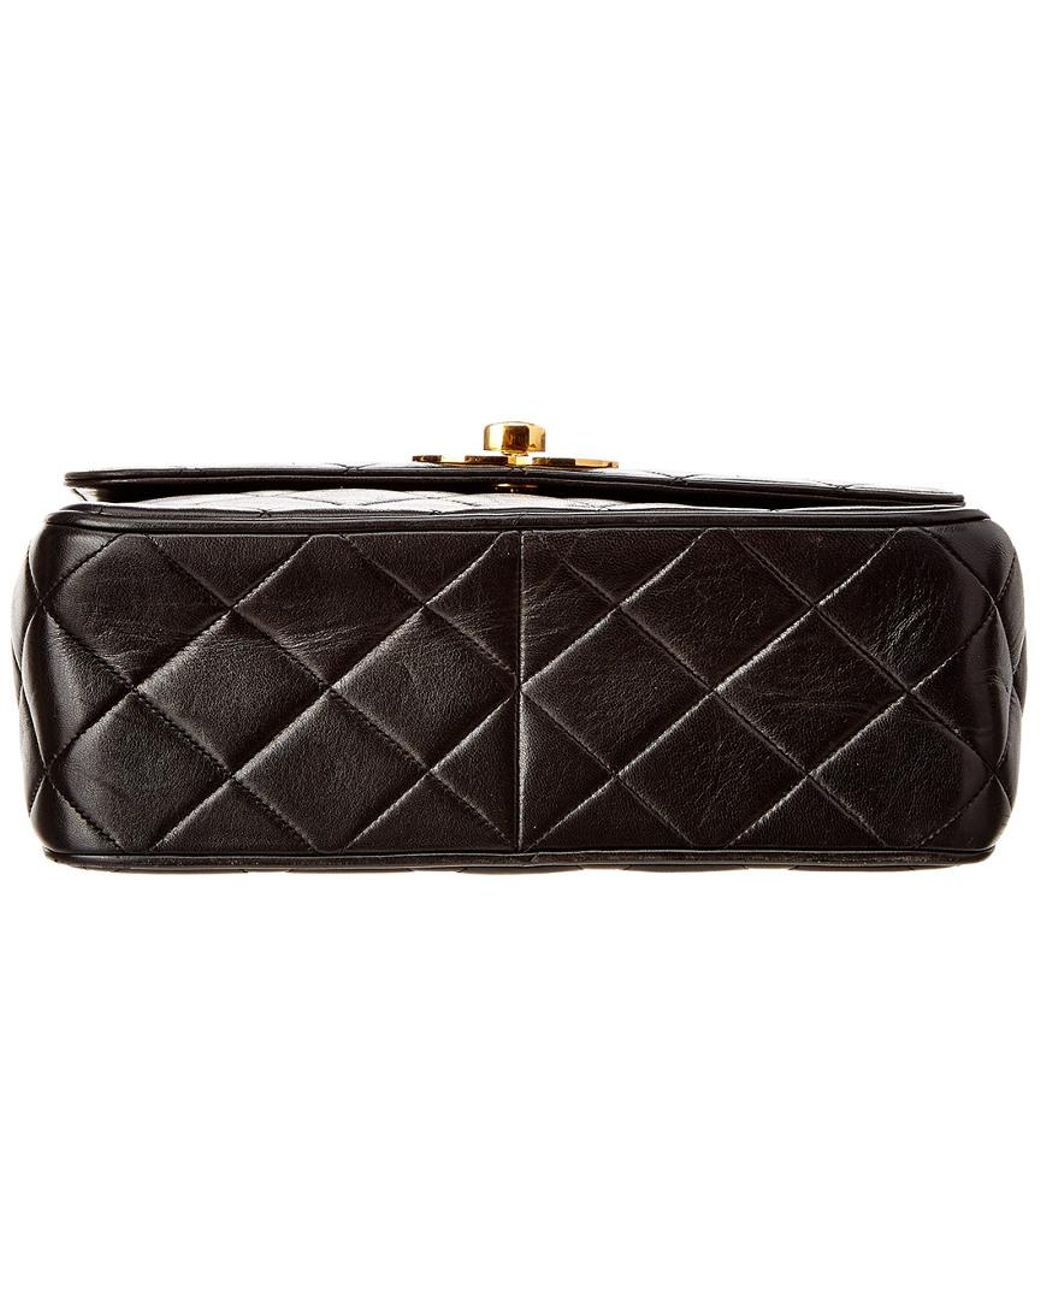 Chanel Women's Black Quilted Lambskin Leather Big Cc Square Single Flap Bag